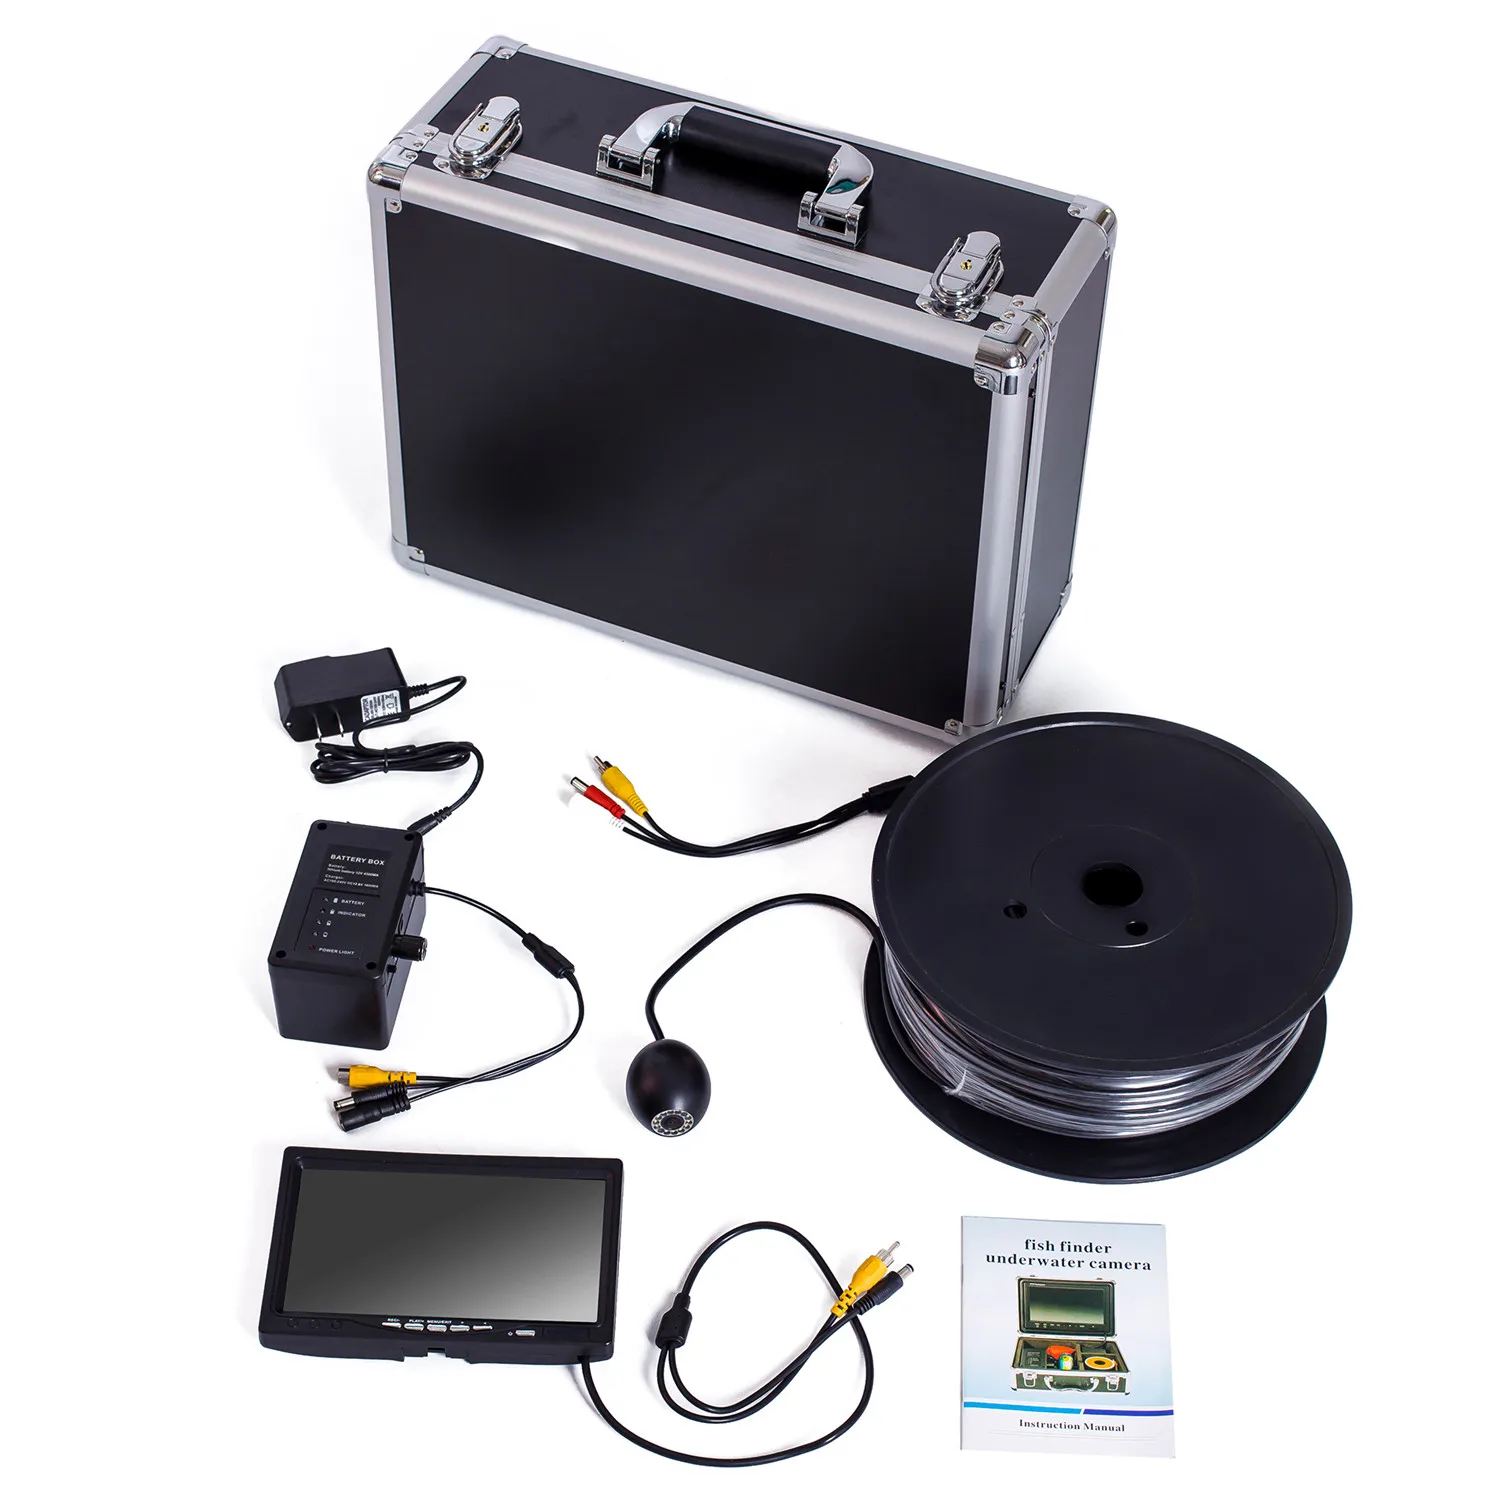 200M Cable Underwater Fish Finder Camera/monitor System IP68 Level Waterproof SY802 with 7'' Screen Display DVR Optional